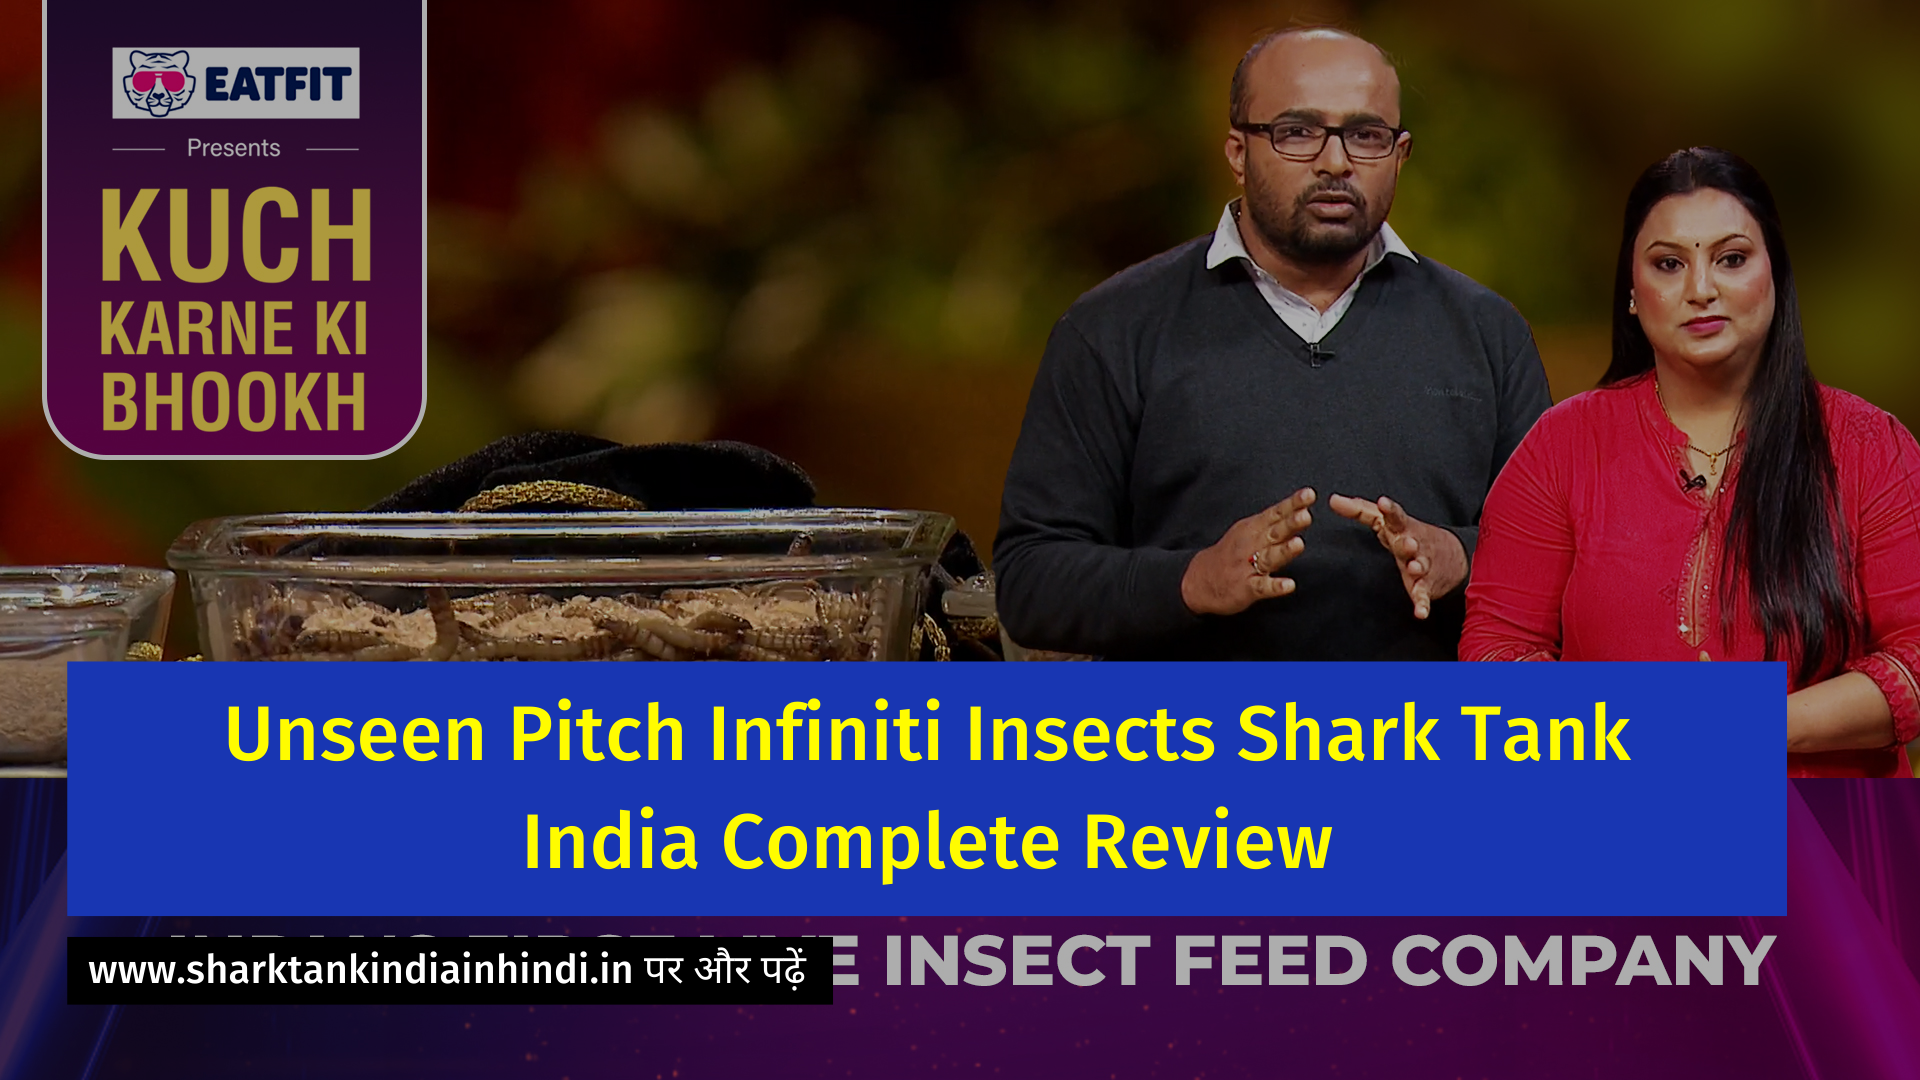 Unseen Pitch Infiniti Insects Shark Tank India Complete Review